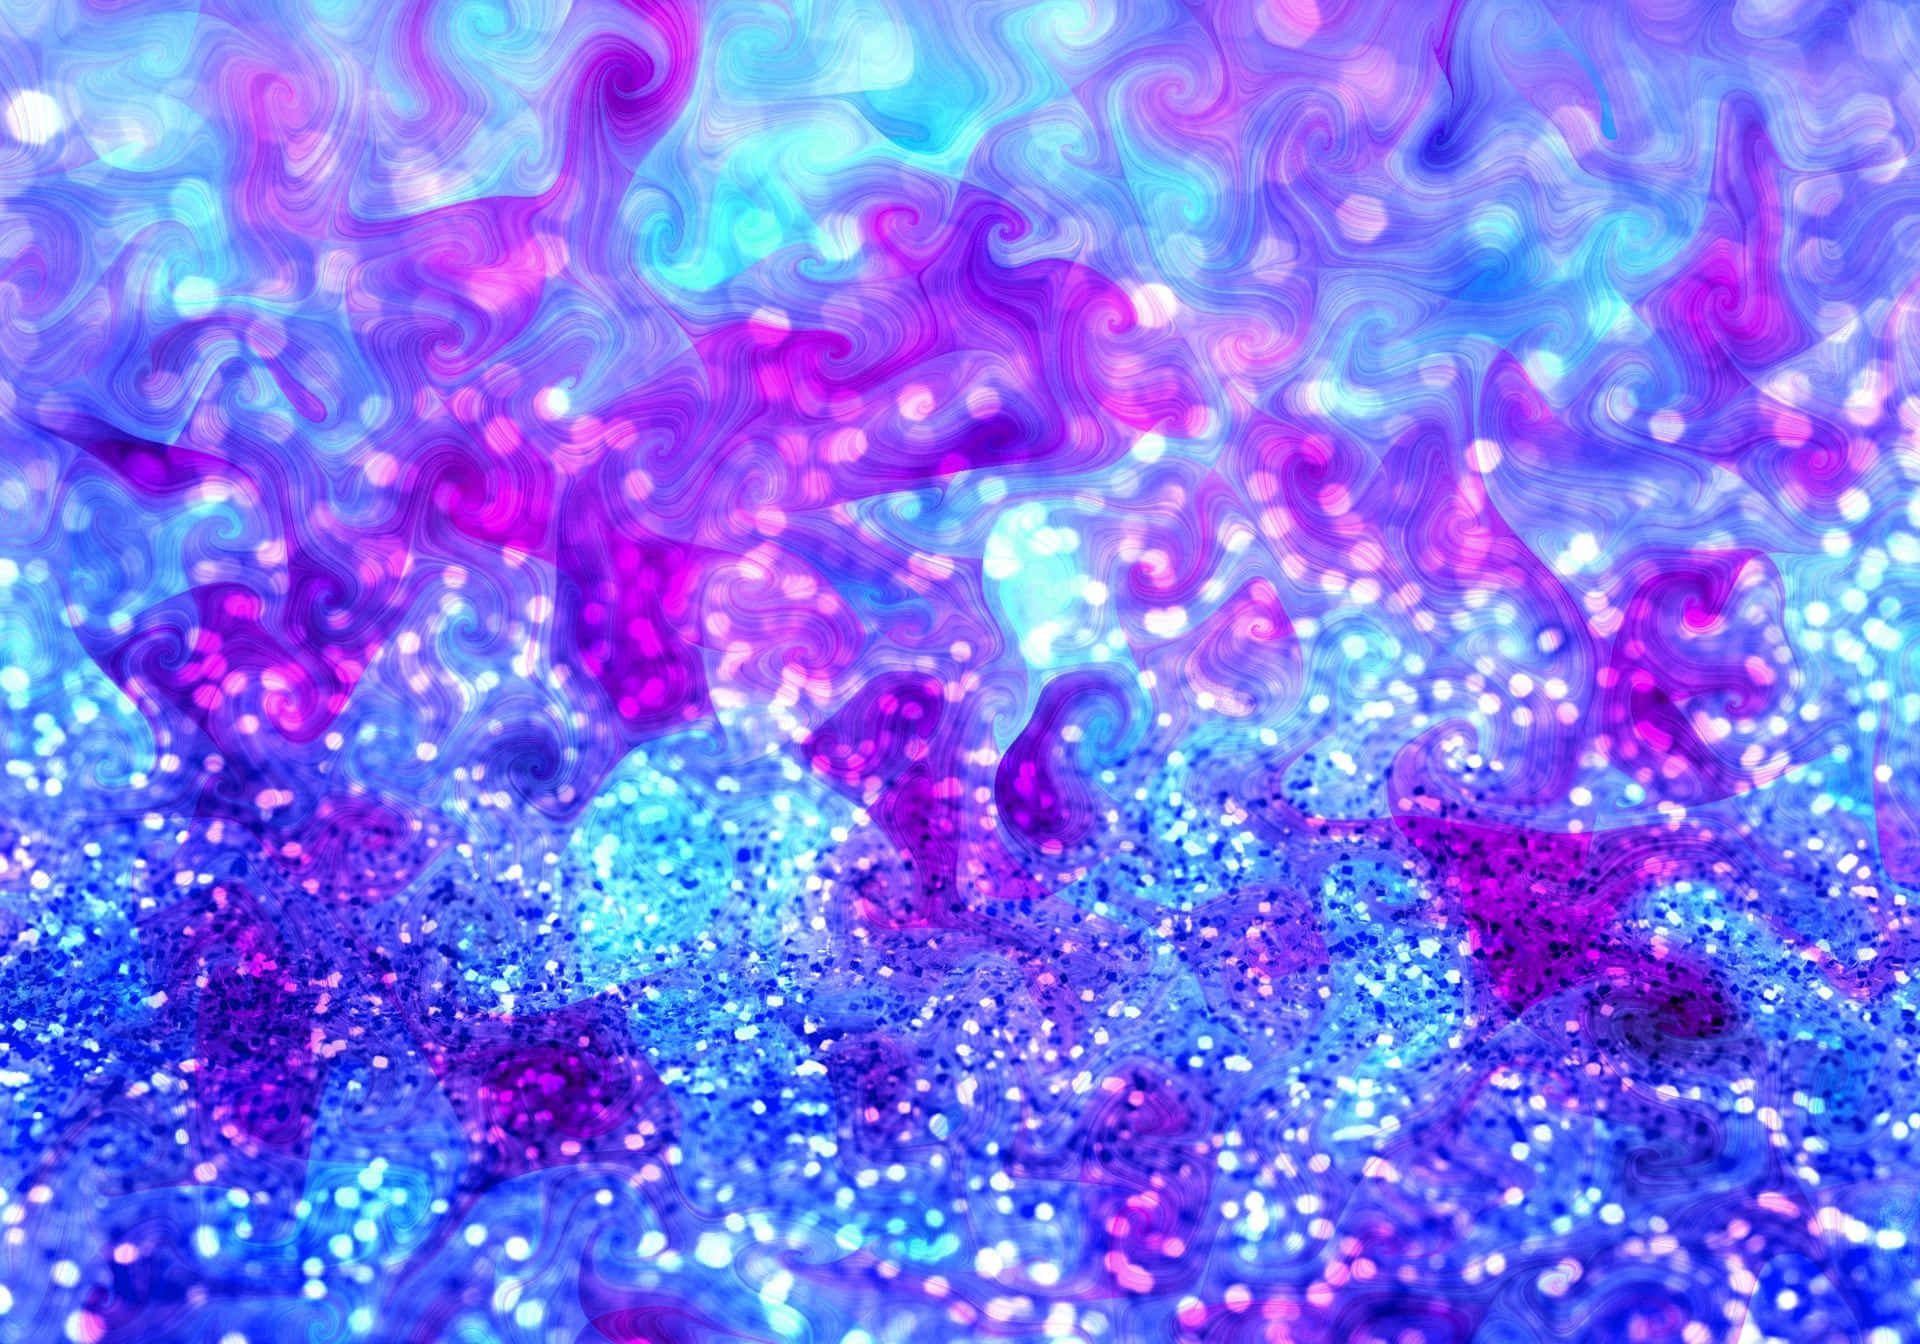 Bright and cheerful sparkles background with a bright neon hue